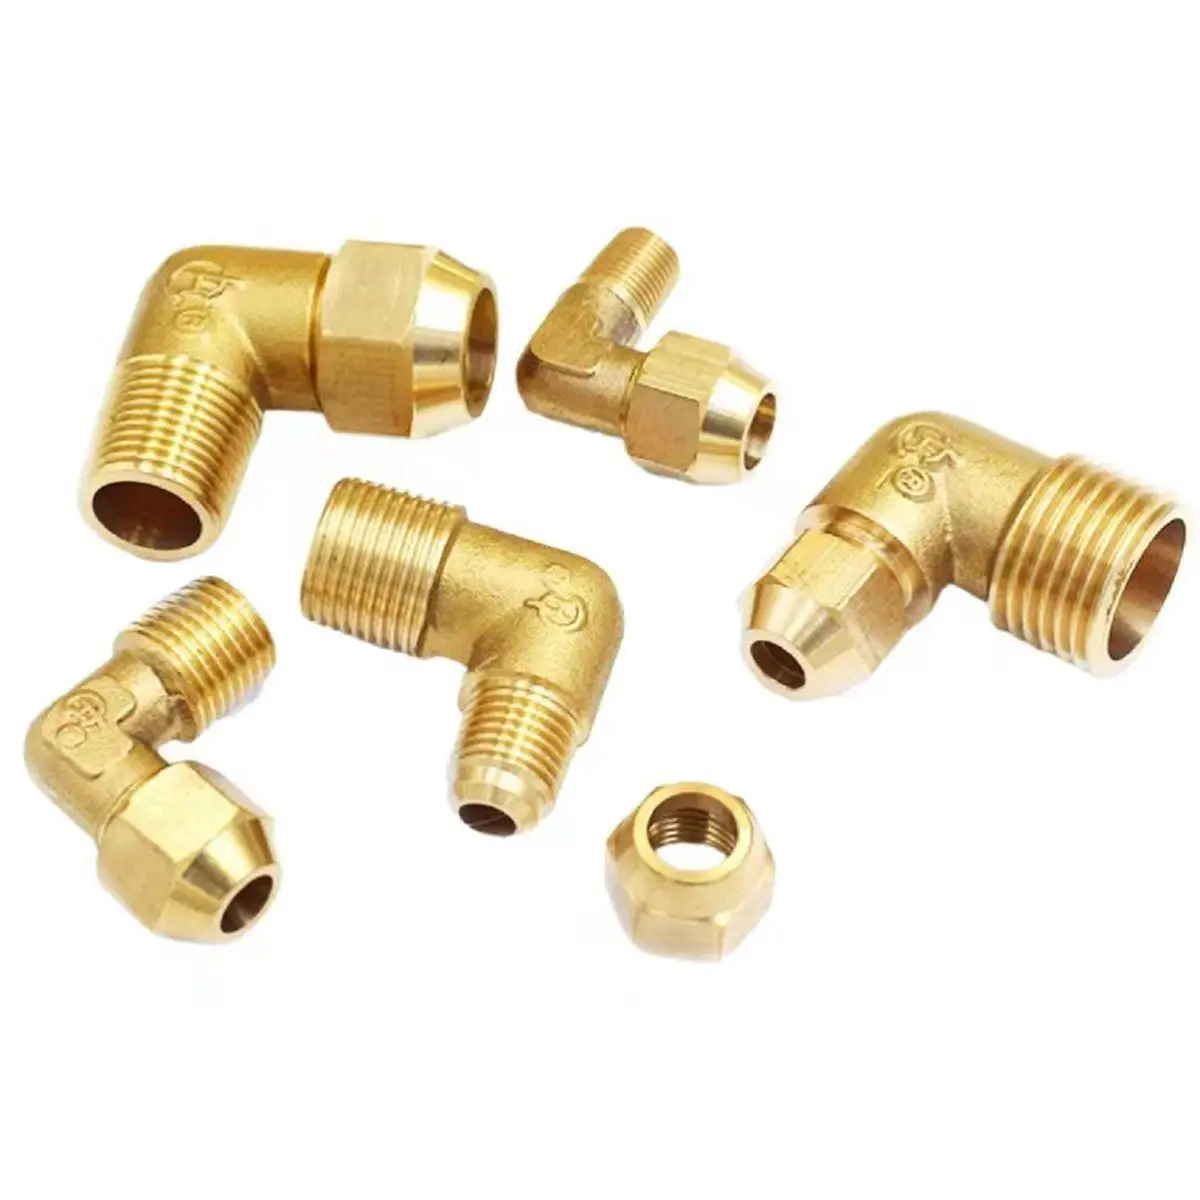 Fit Tube O.D 6/8/10/12mm x 1/8" 1/4" 3/8"8 1/2" BSPP Male Brass Elbow Flare Pipe Fitting With Nut